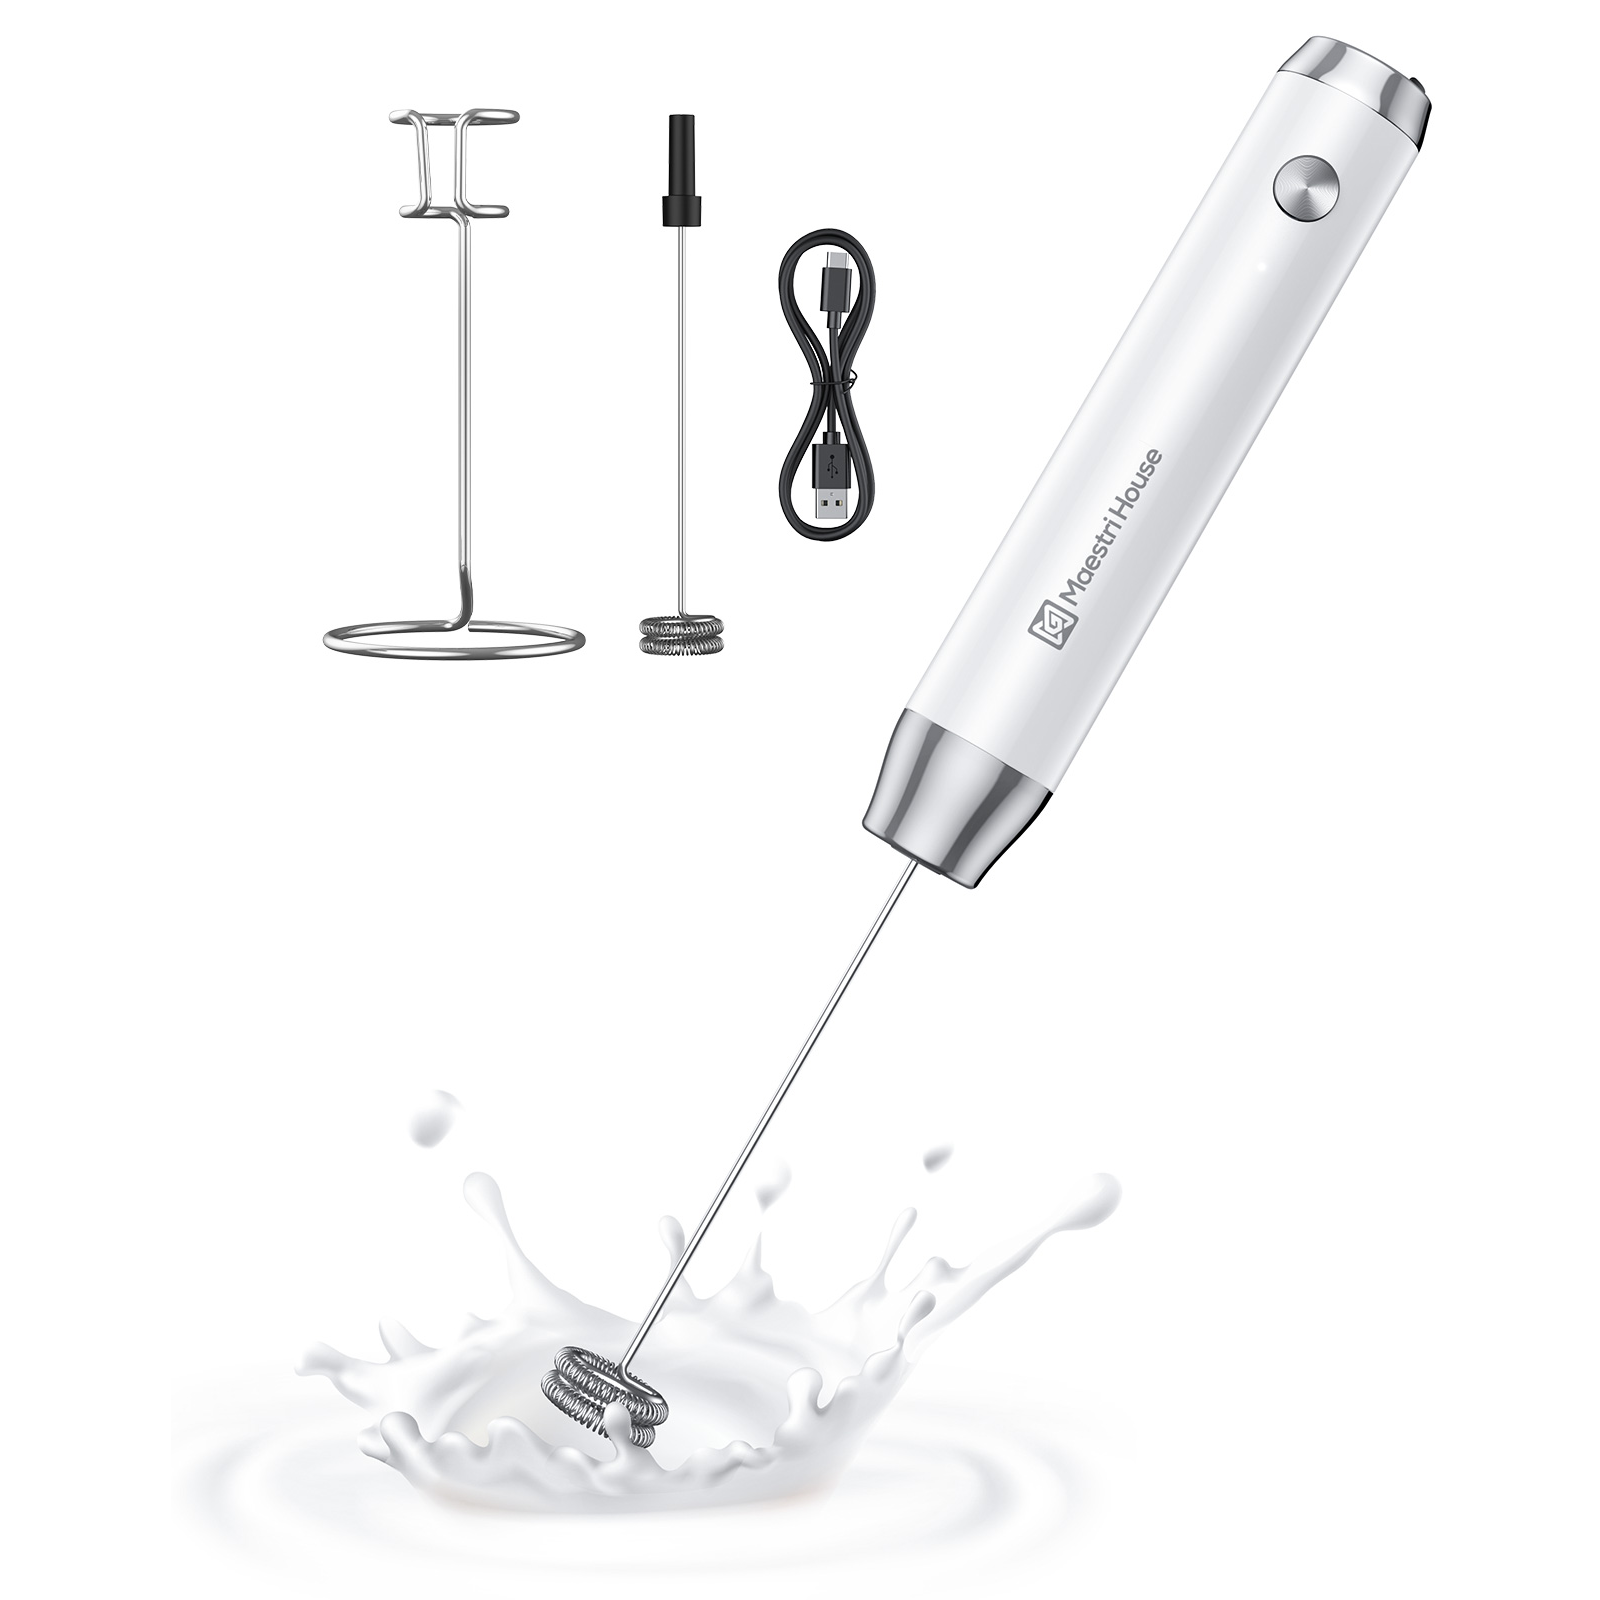 Handheld Electric Milk Frother Waterproof Detachable Stainless